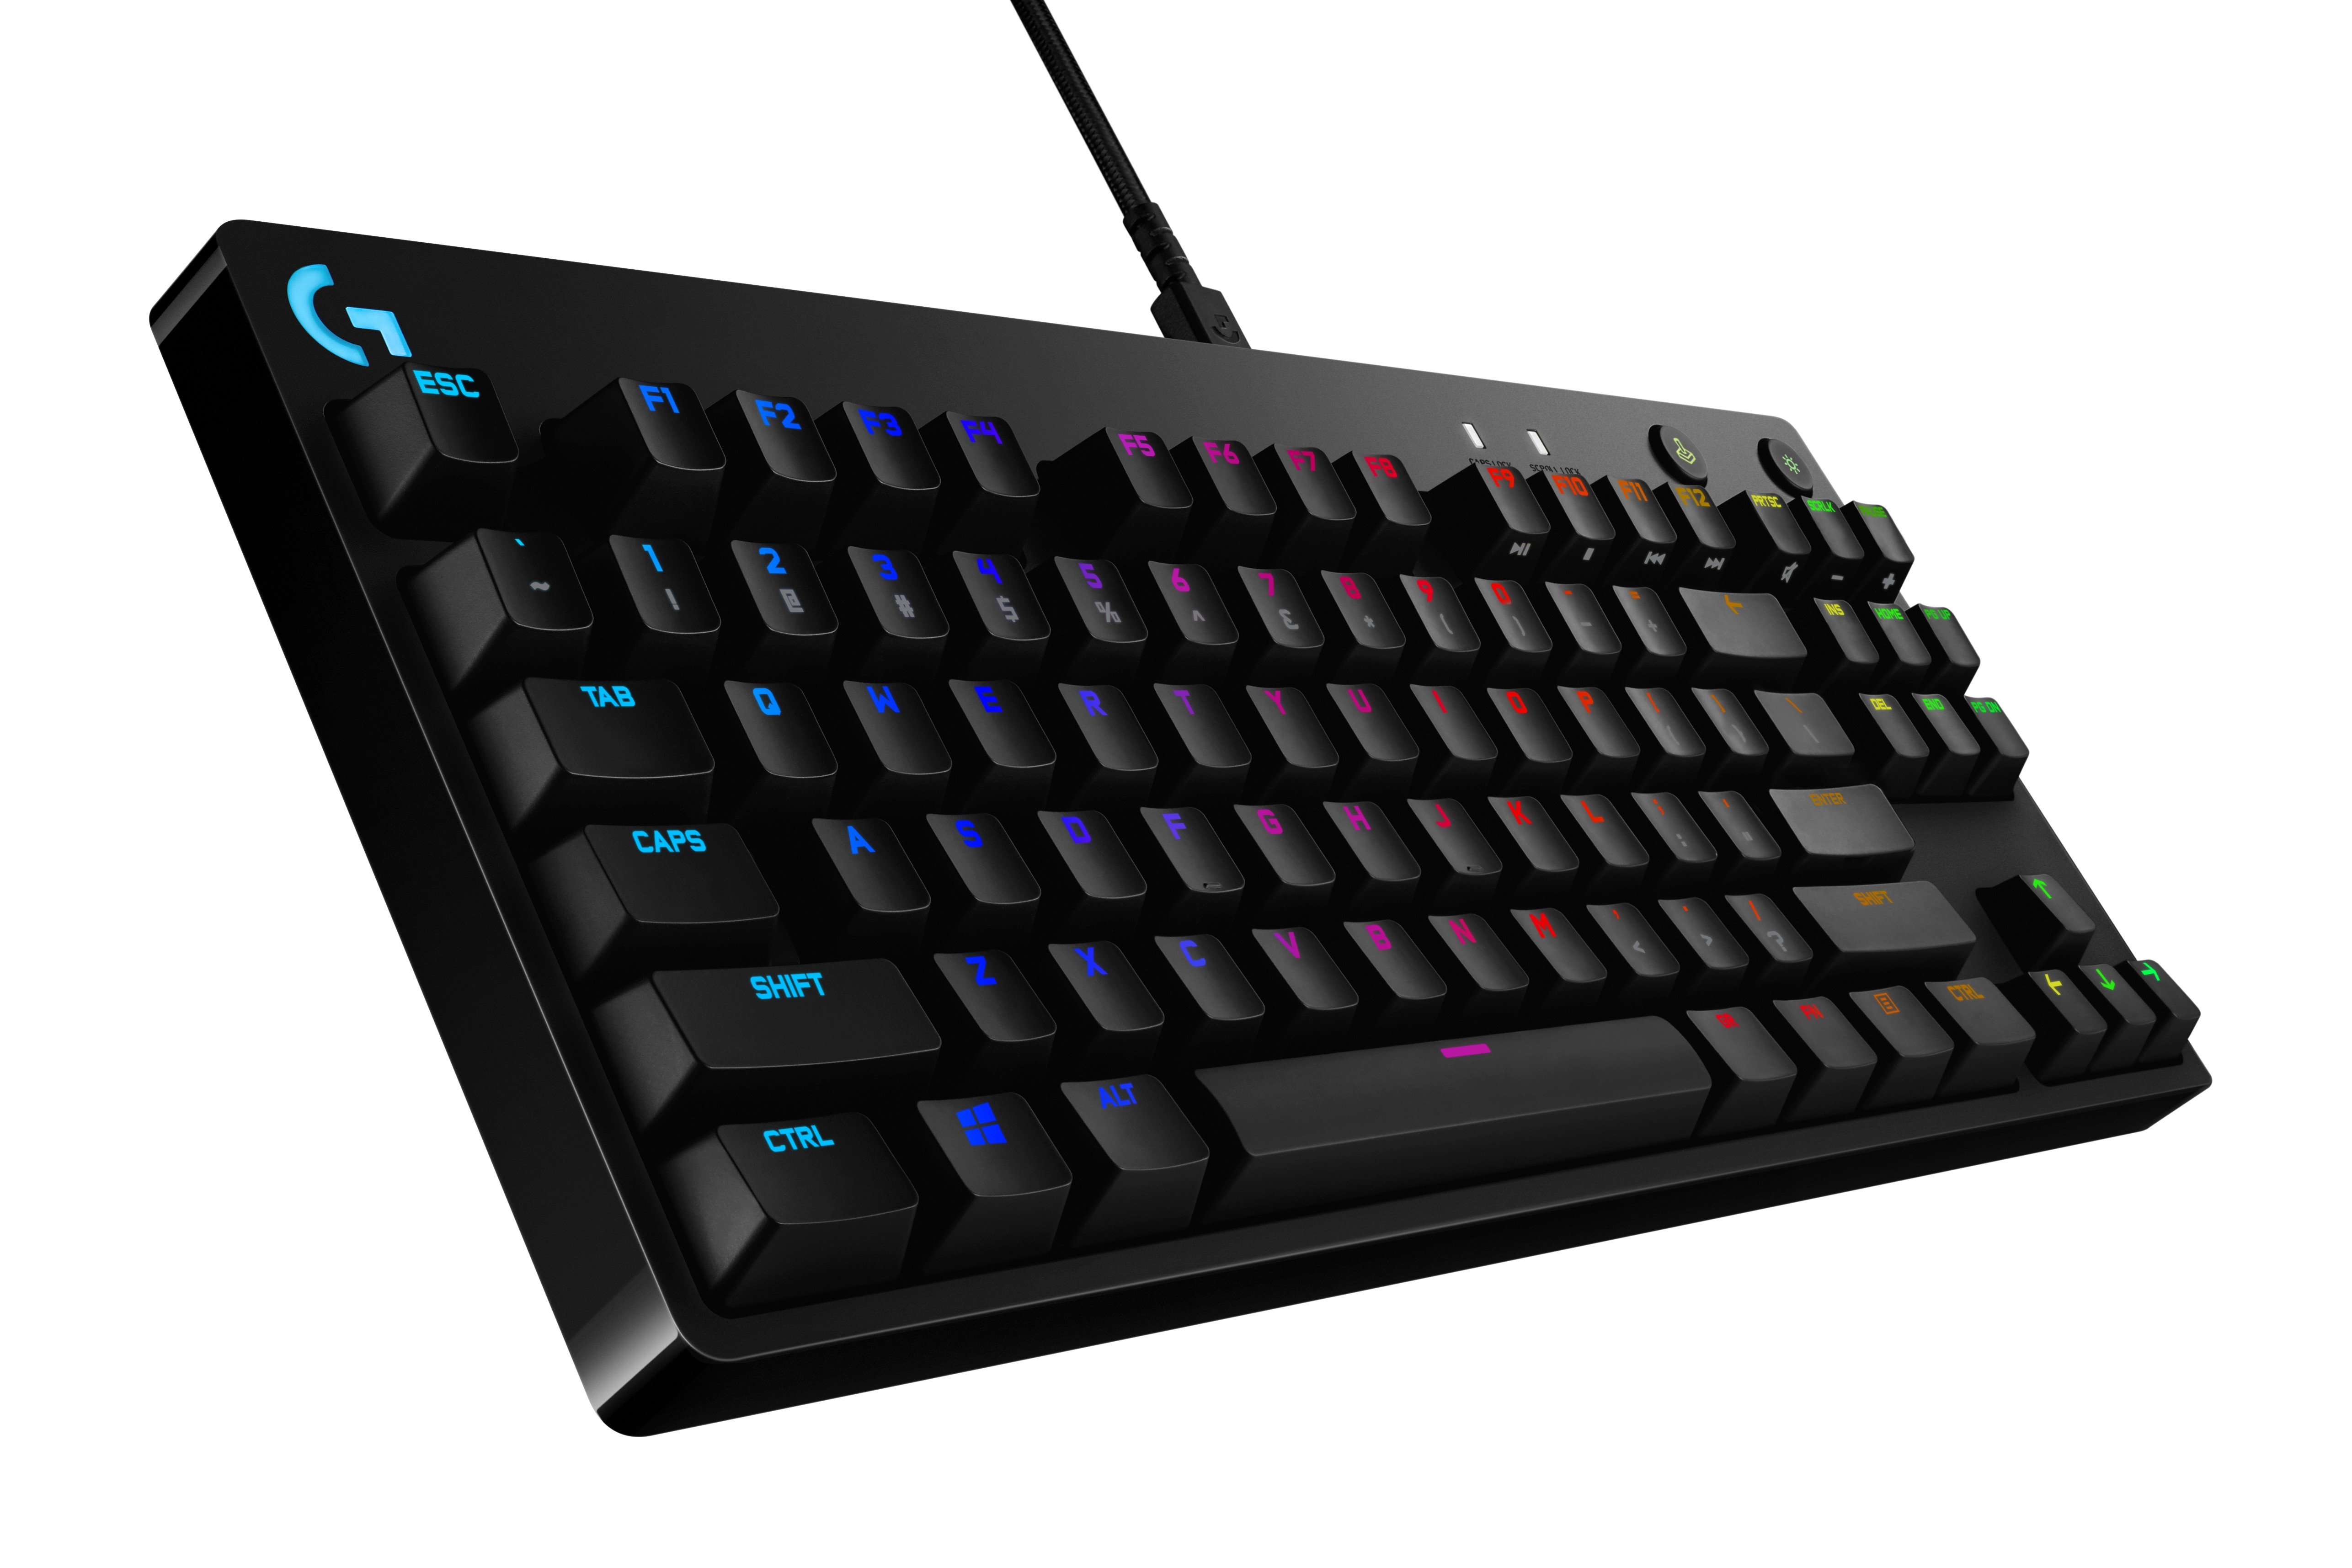 Logitech G PRO X mechanical gaming keyboard has swappable switches